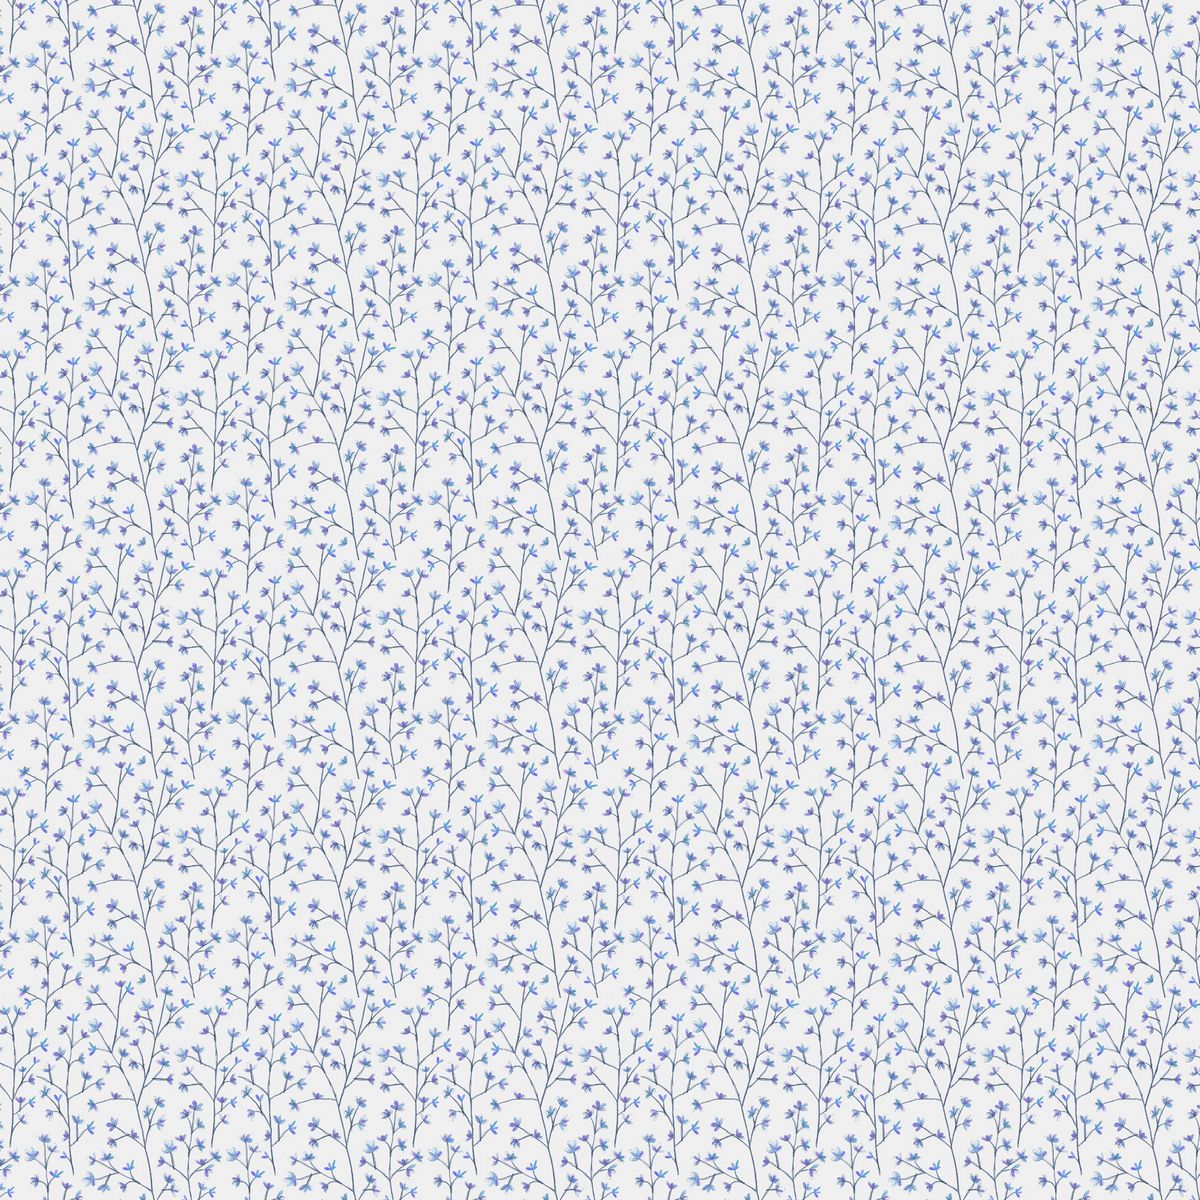 Ophelia Sheer Bluebell Cotton Fabric by Voyage Maison